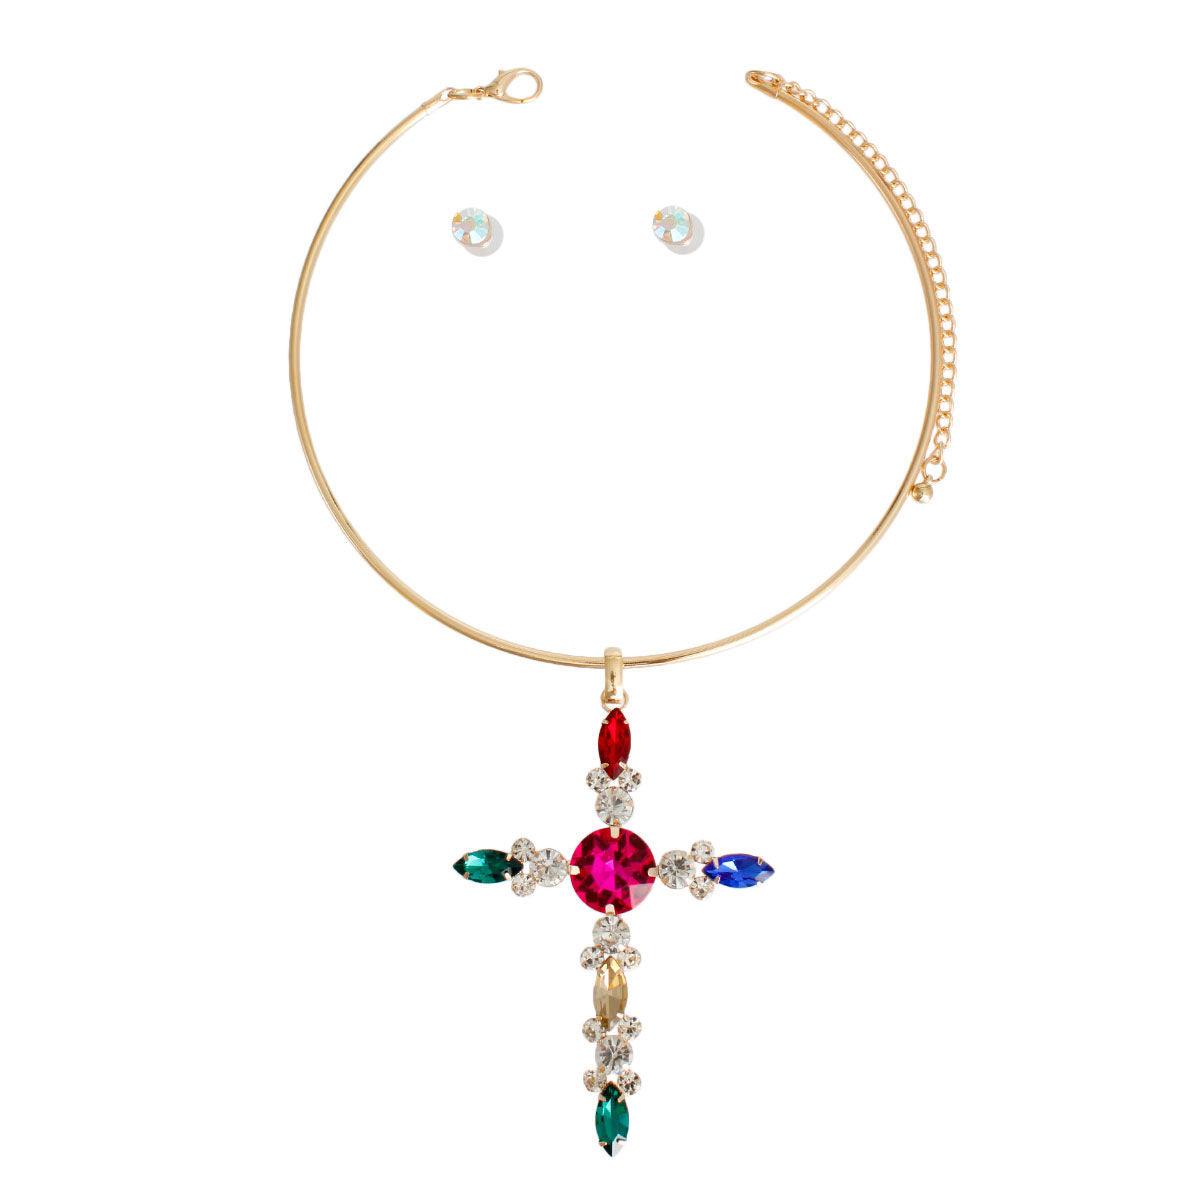 Complete Your Look with a Multicolor Cross Pendant: Earrings and; Choker Necklace Set